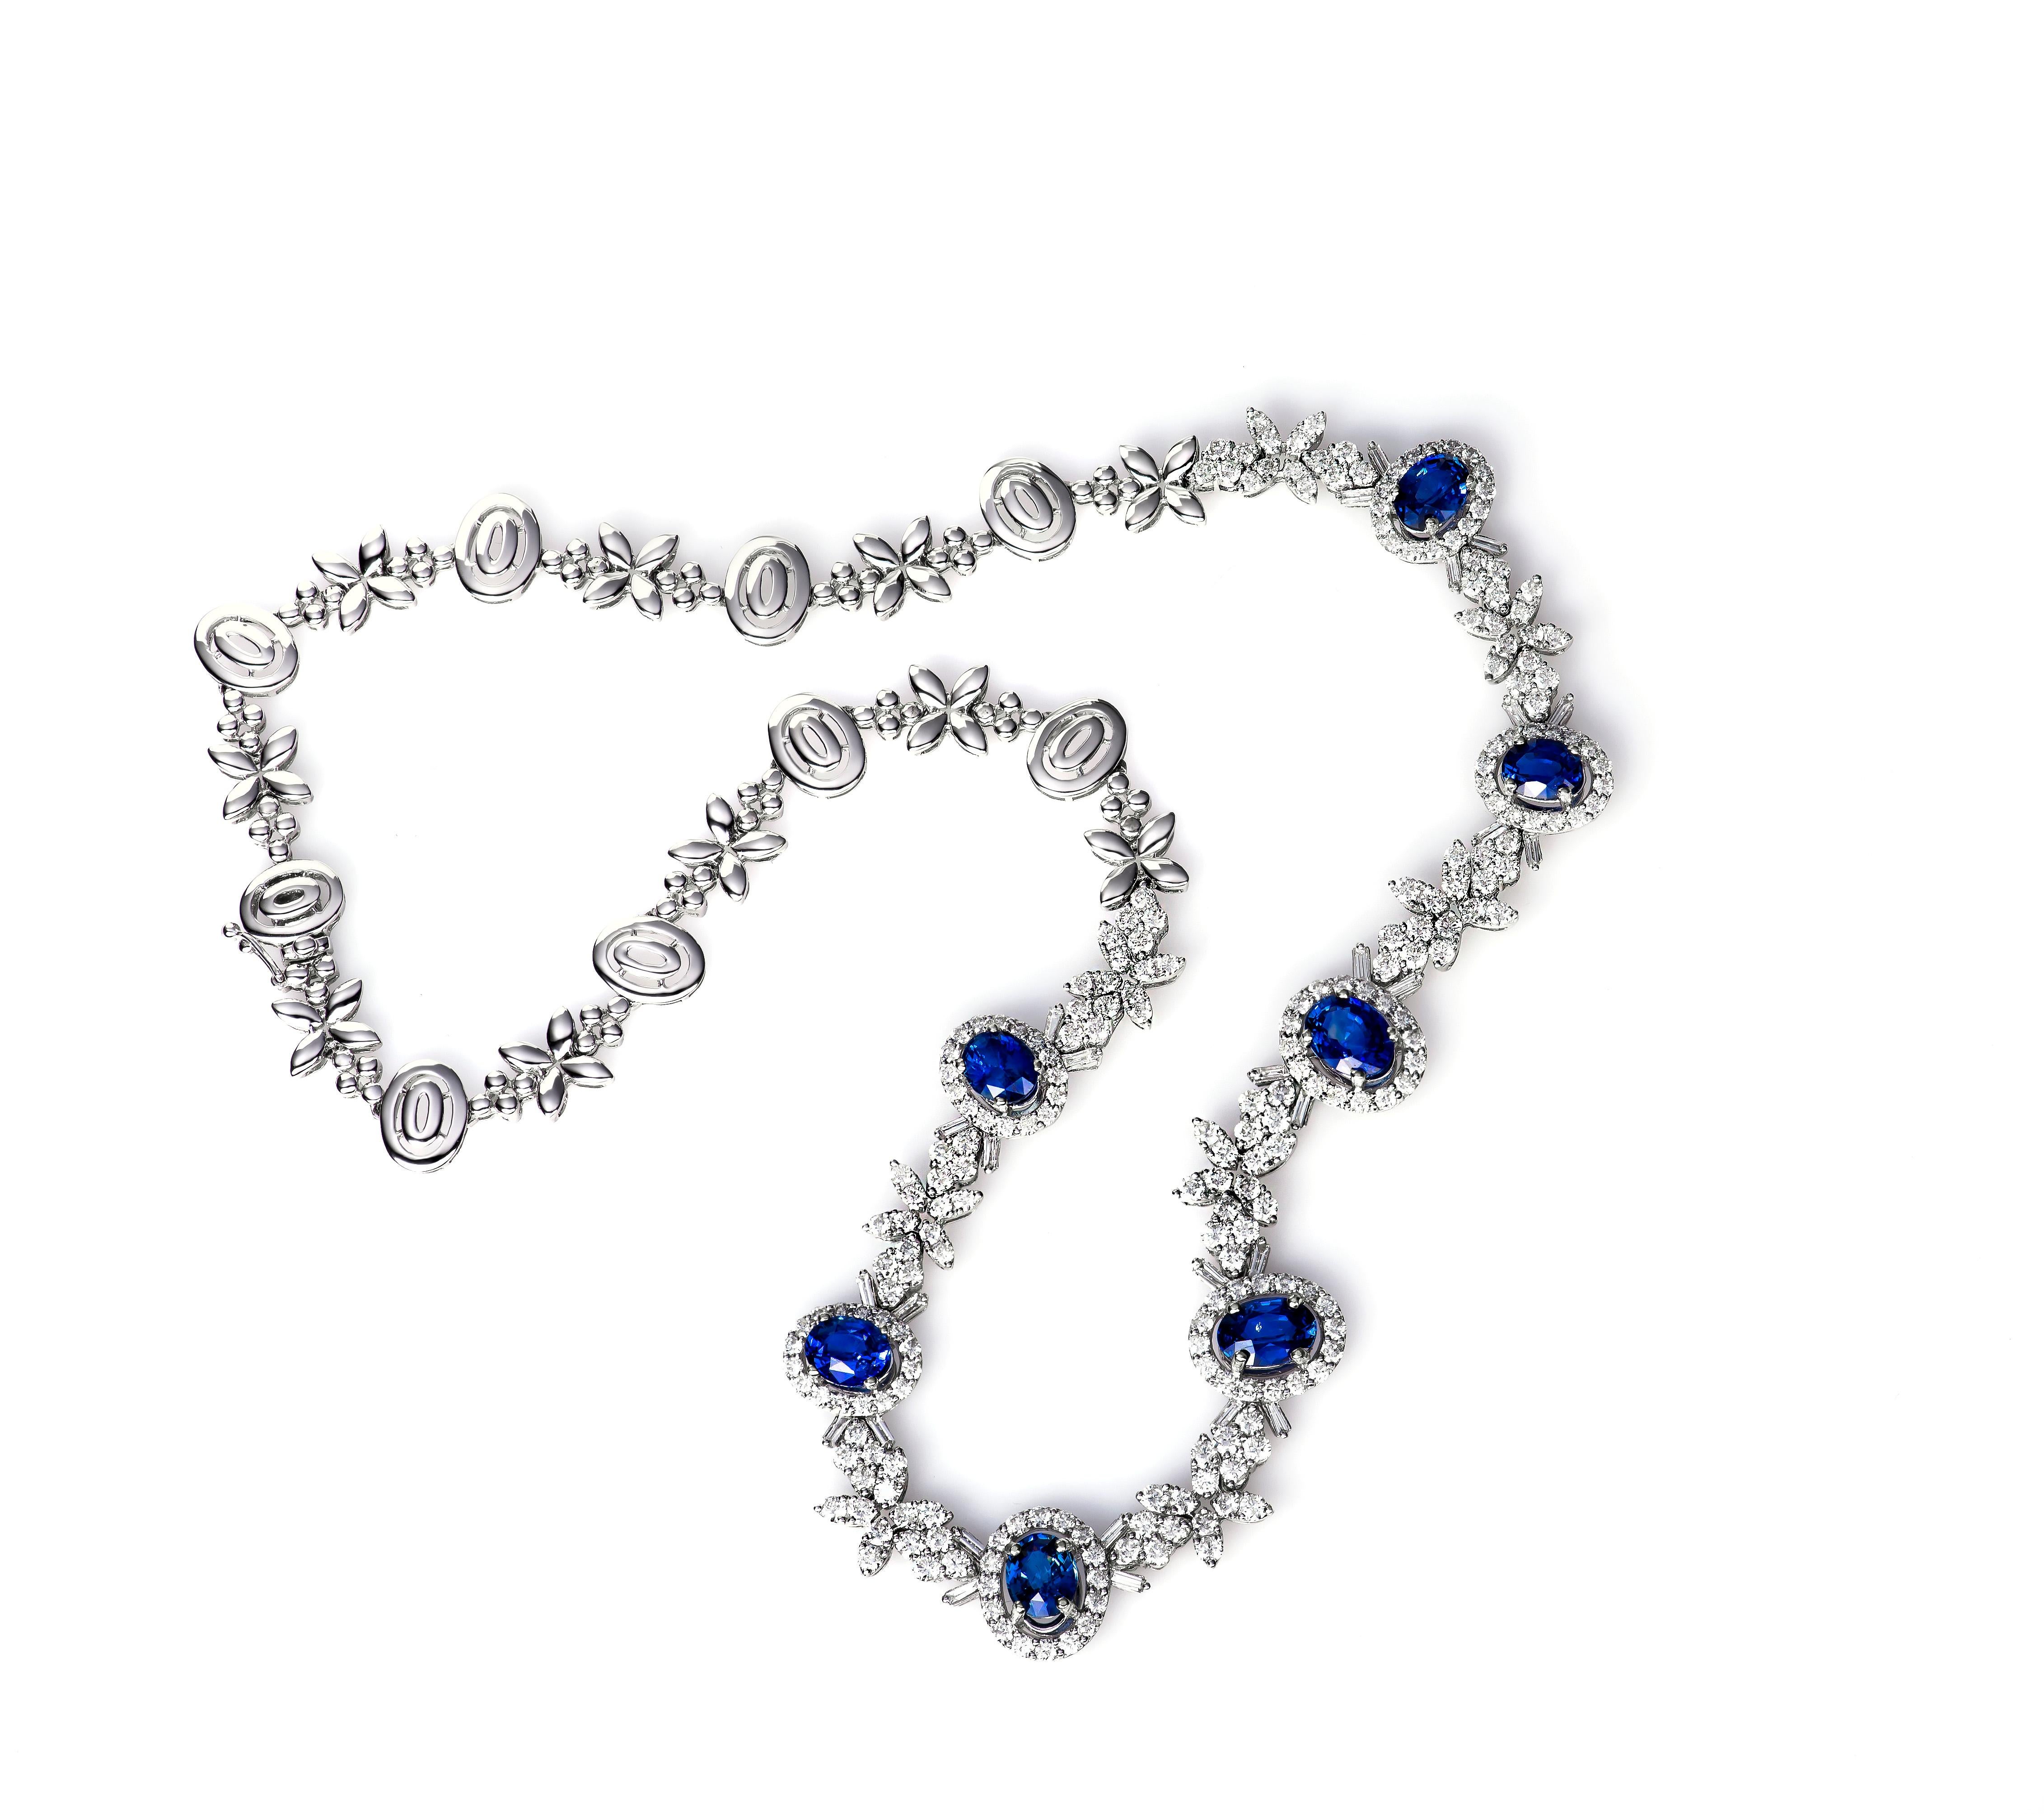 Estate 14K White Gold 36.00 CTW Sapphire & Diamond Necklace 32.6 Grams

There Are Oval Shaped Natural Blue Sapphires, Of About 1.00 Carat Each, Weighing Approximately 27.00 Carat Total Weight.


 433 Round Brilliant Cut Natural Diamonds, Weighing